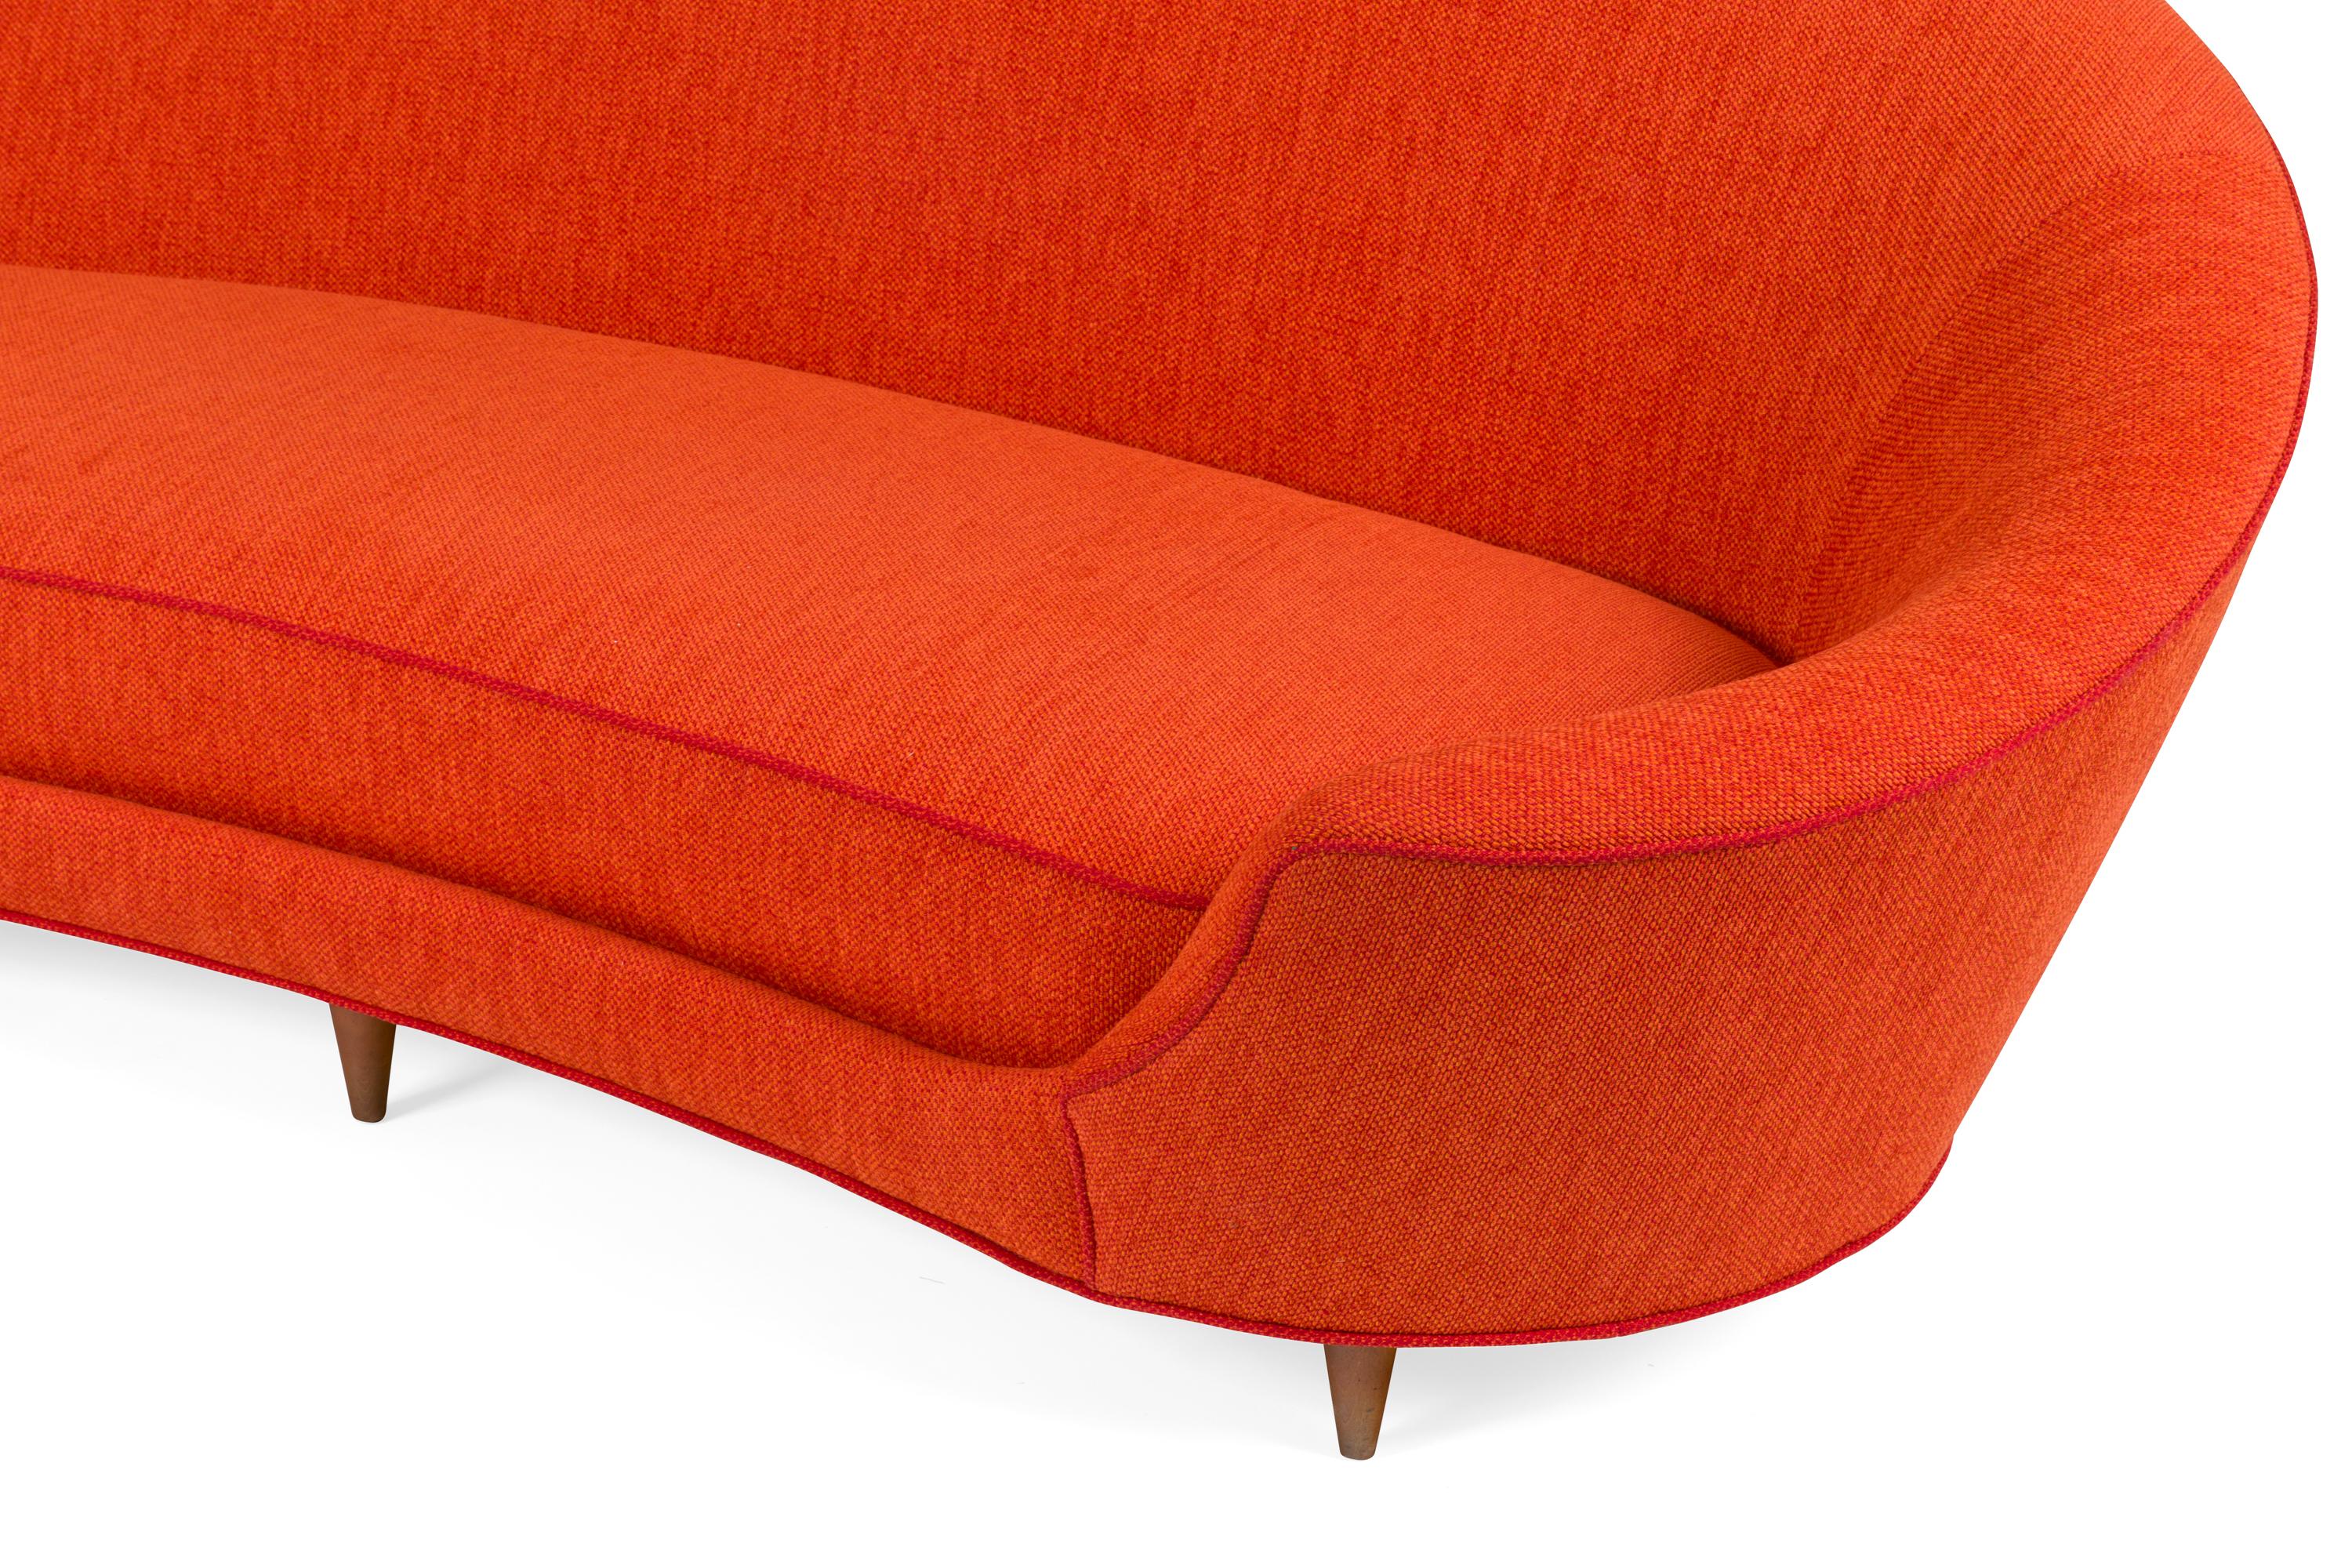 Mid-Century Modern Cesare Lacca Curved Sofa Reupholstered in Orange Fabric, Italy 1950s